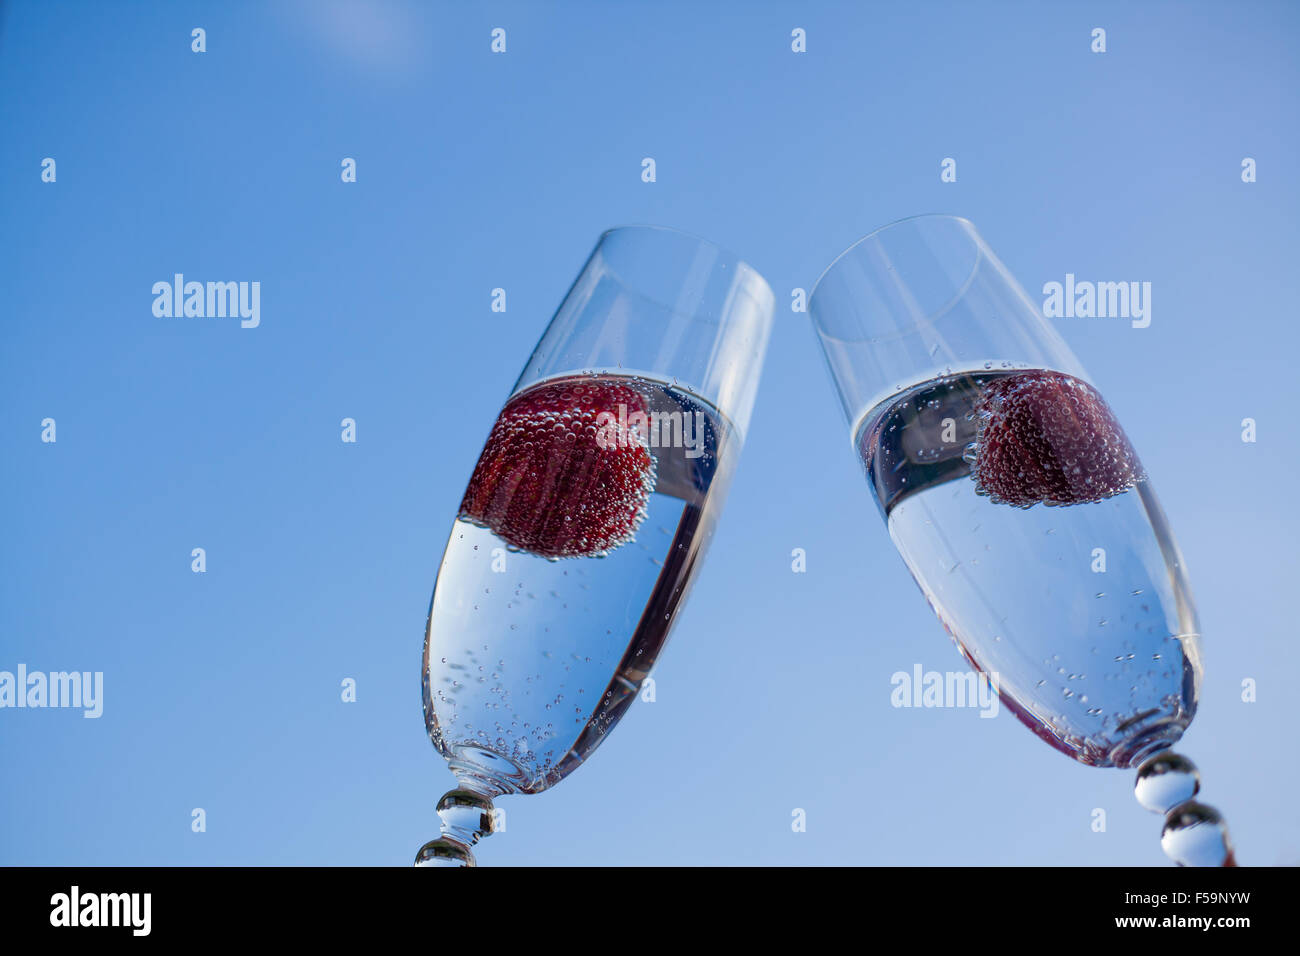 Glasses of champagne and strawberries with a background of blue sky. Stock Photo